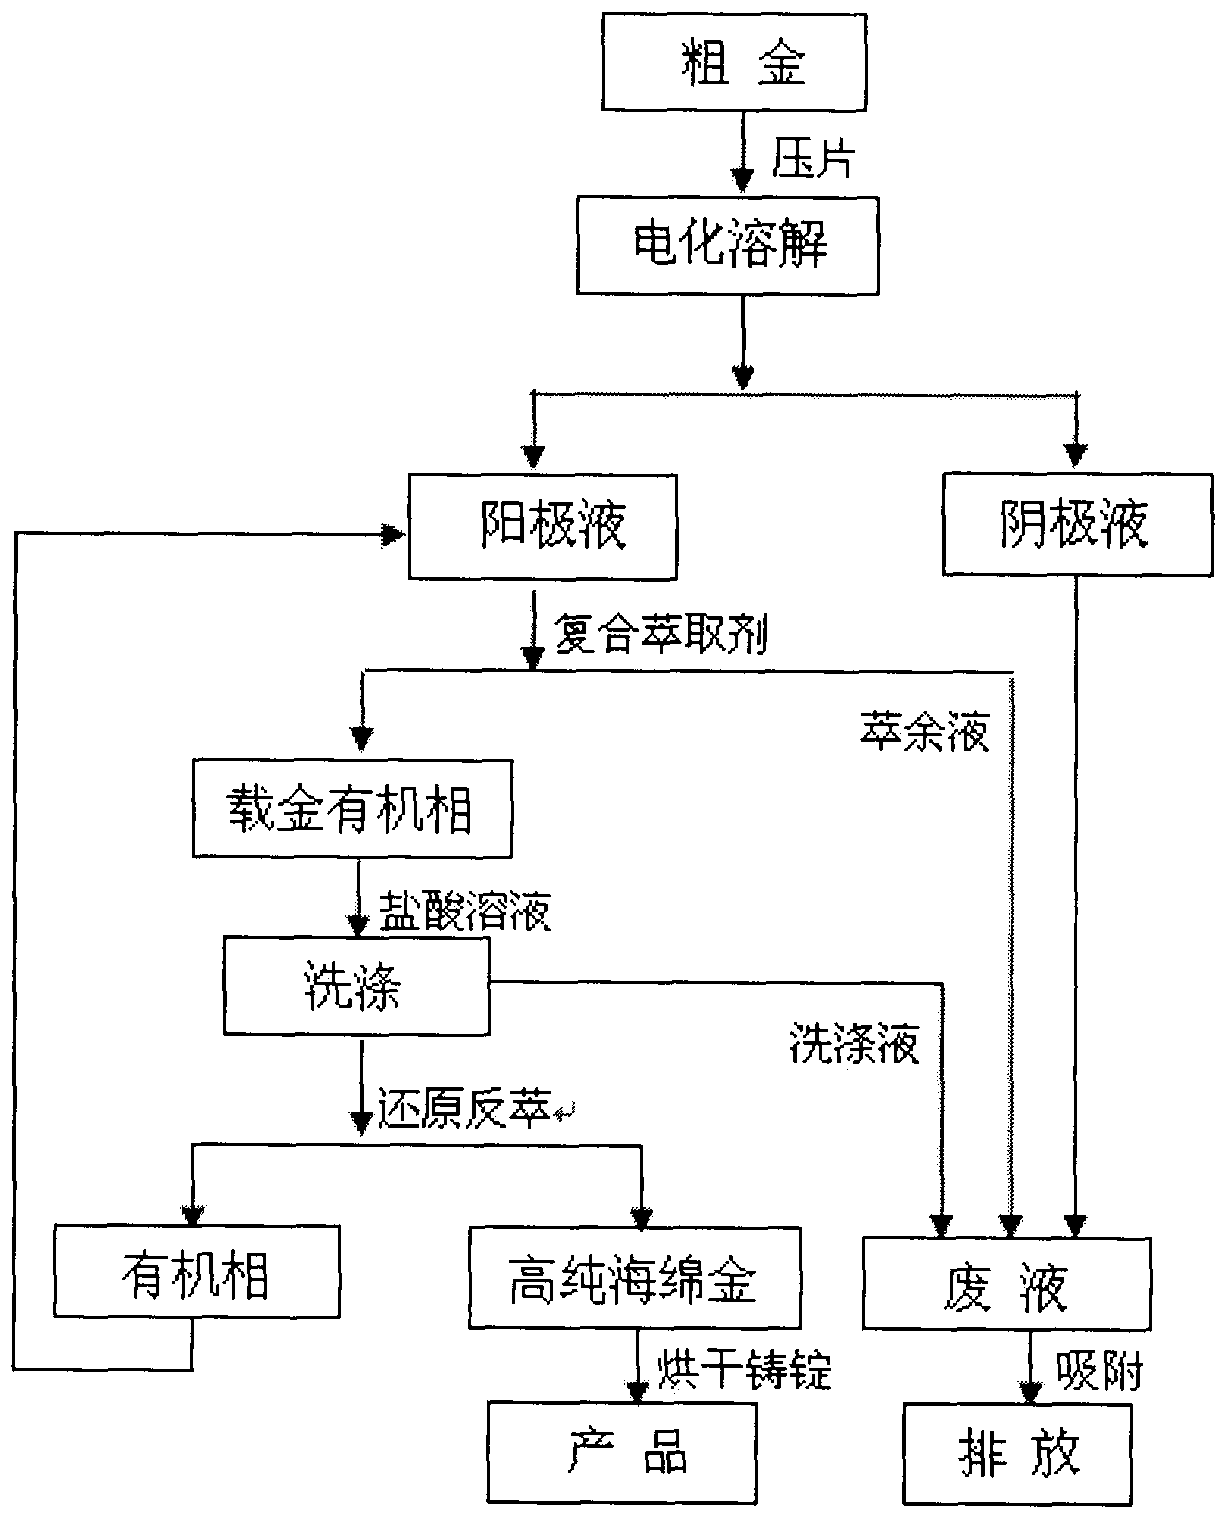 Preparation process of high purity gold